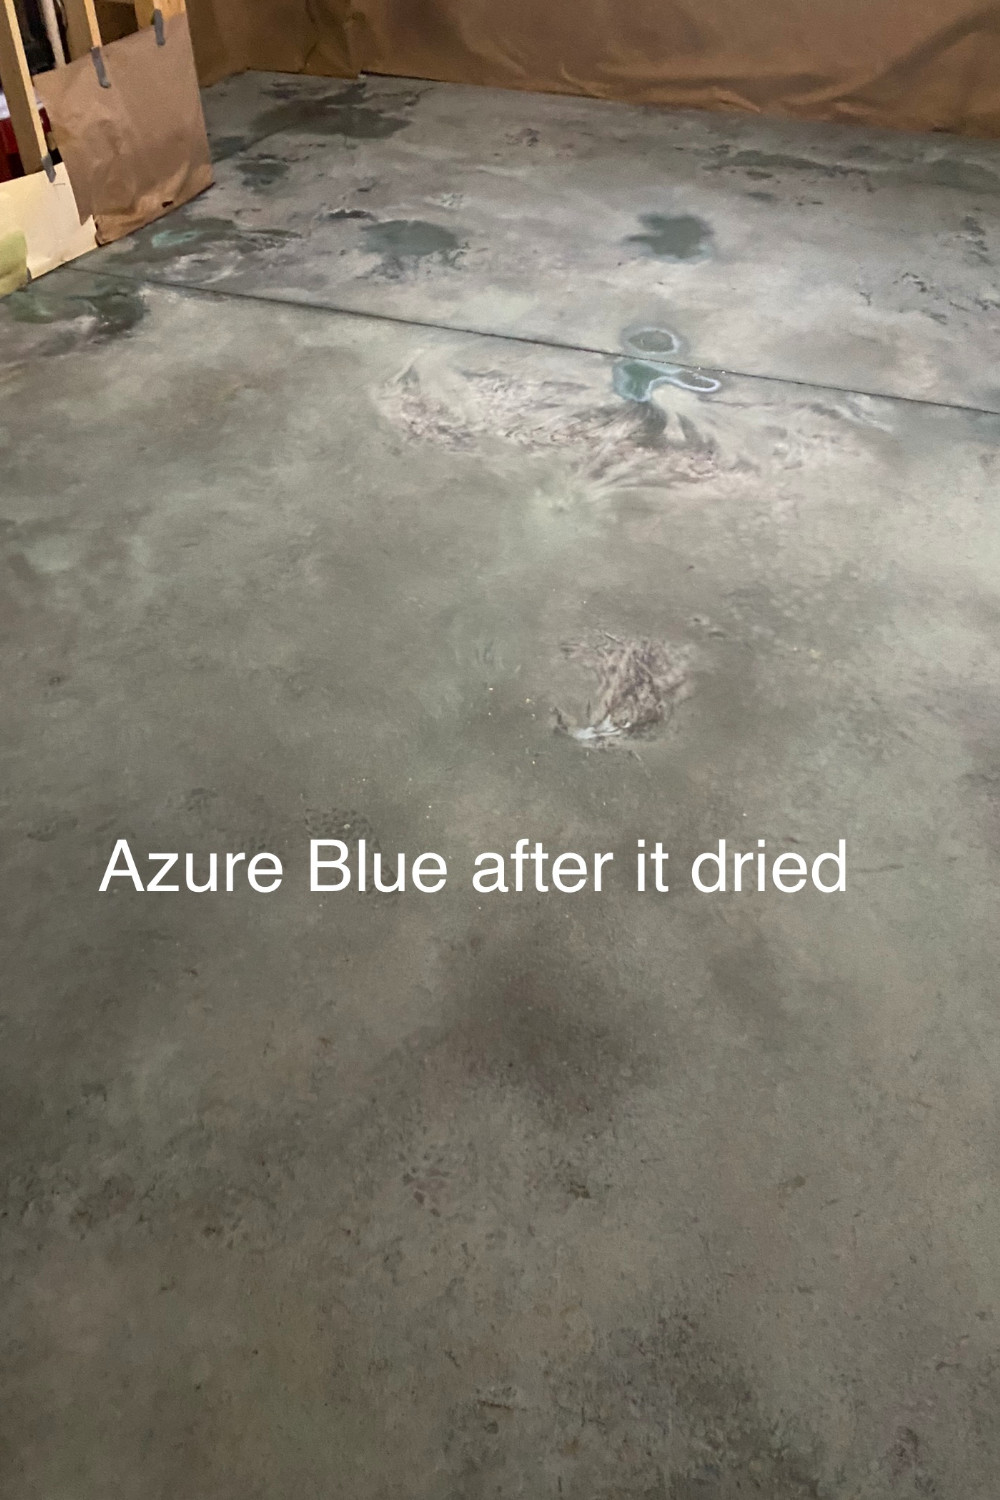 A photo of a concrete basement floor with a dried Azure Blue acid stain covering the surface